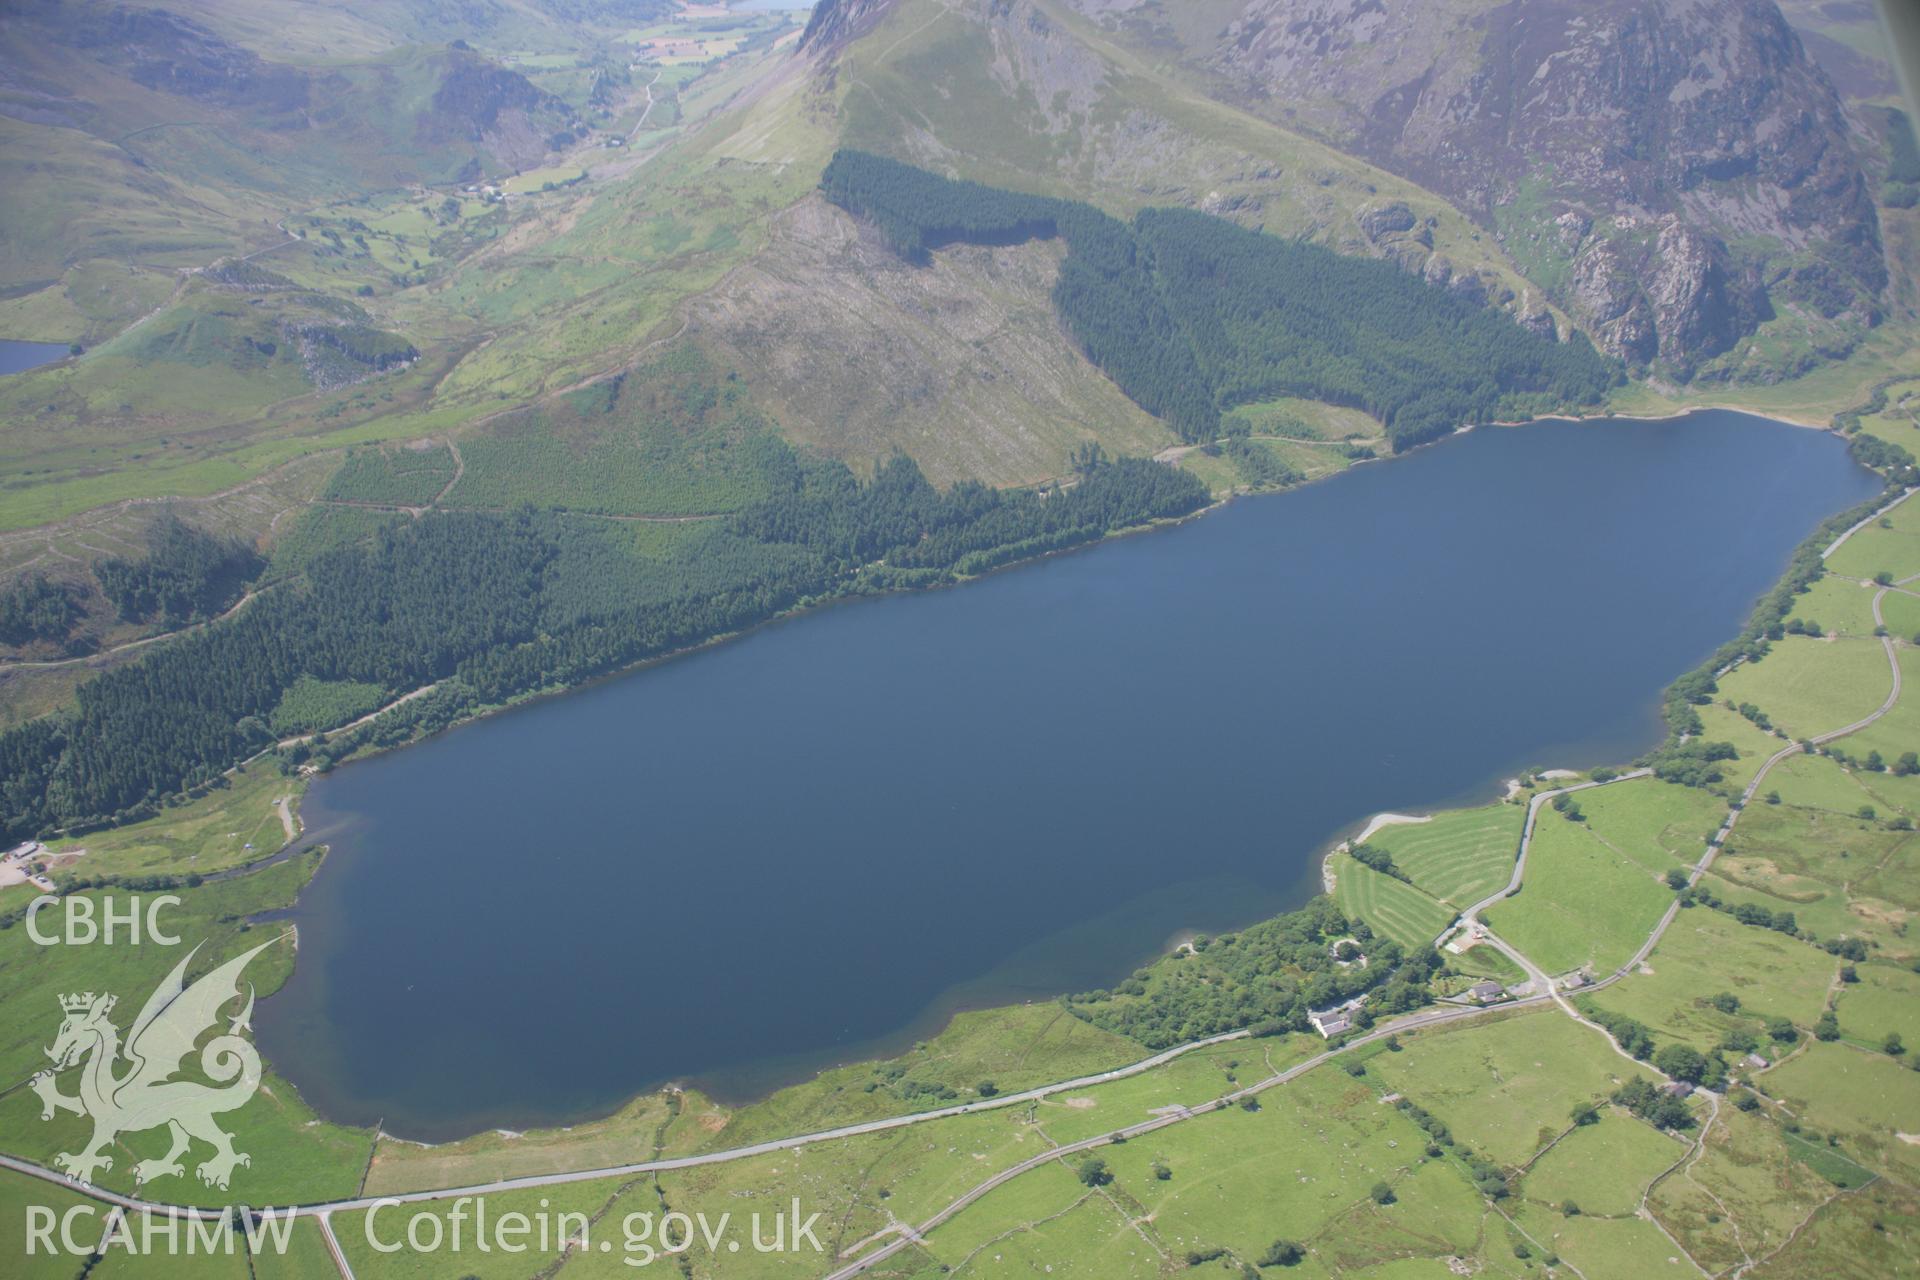 RCAHMW colour oblique aerial photograph of Llyn Cwellyn. Taken on 18 July 2006 by Toby Driver